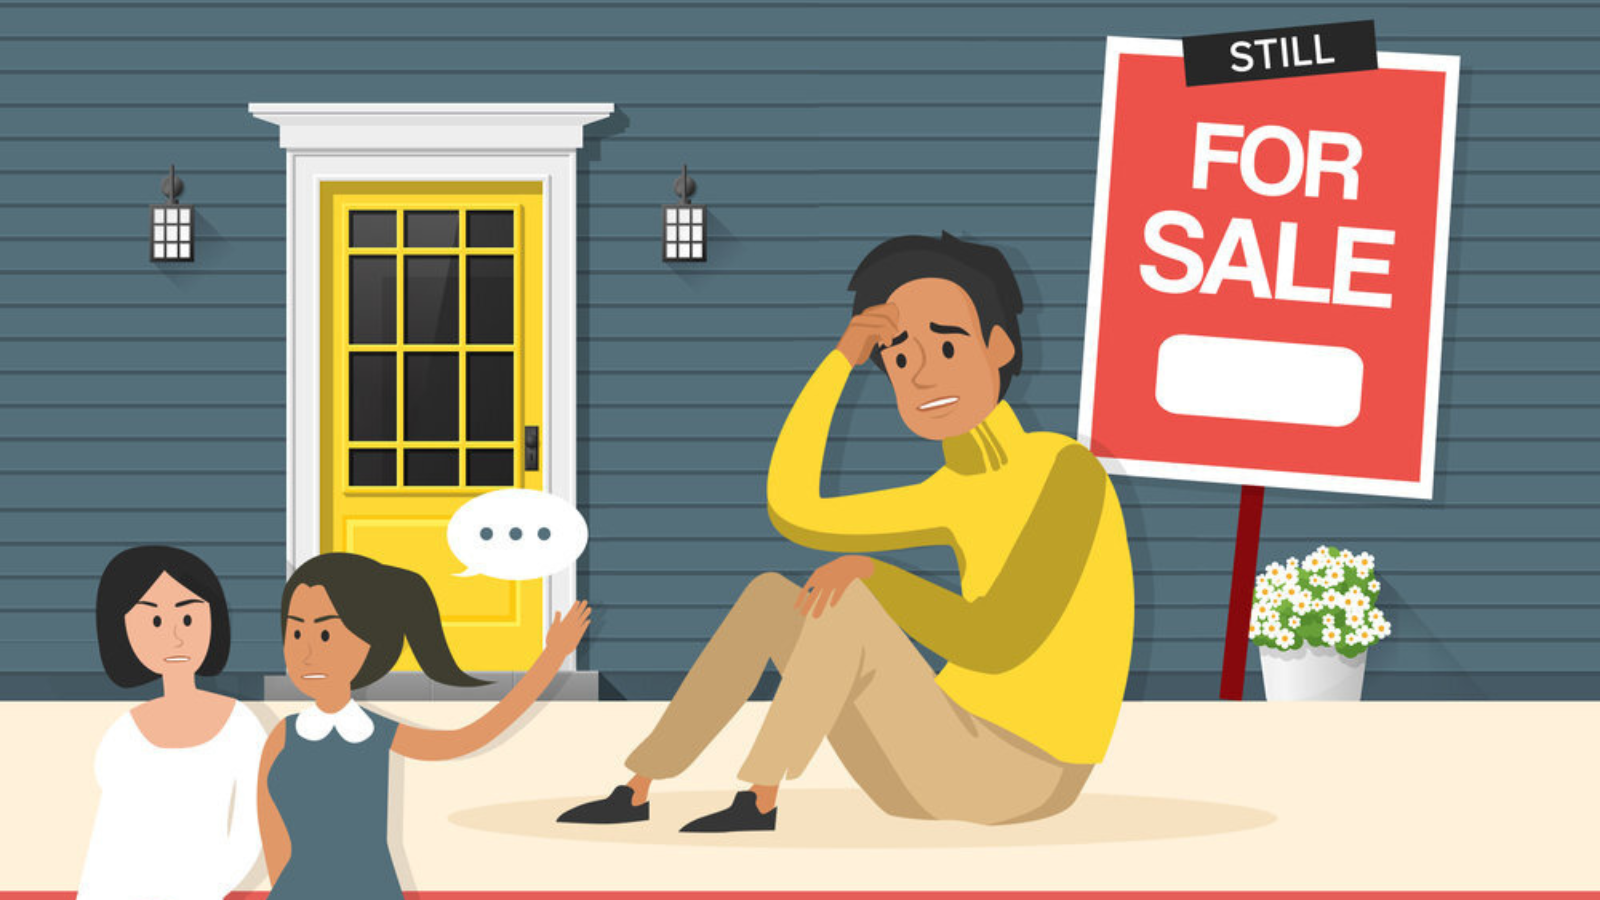 Why Do Home Sales Fall Through? 5 Common Reasons Why The Seller or Buyer Walk Away